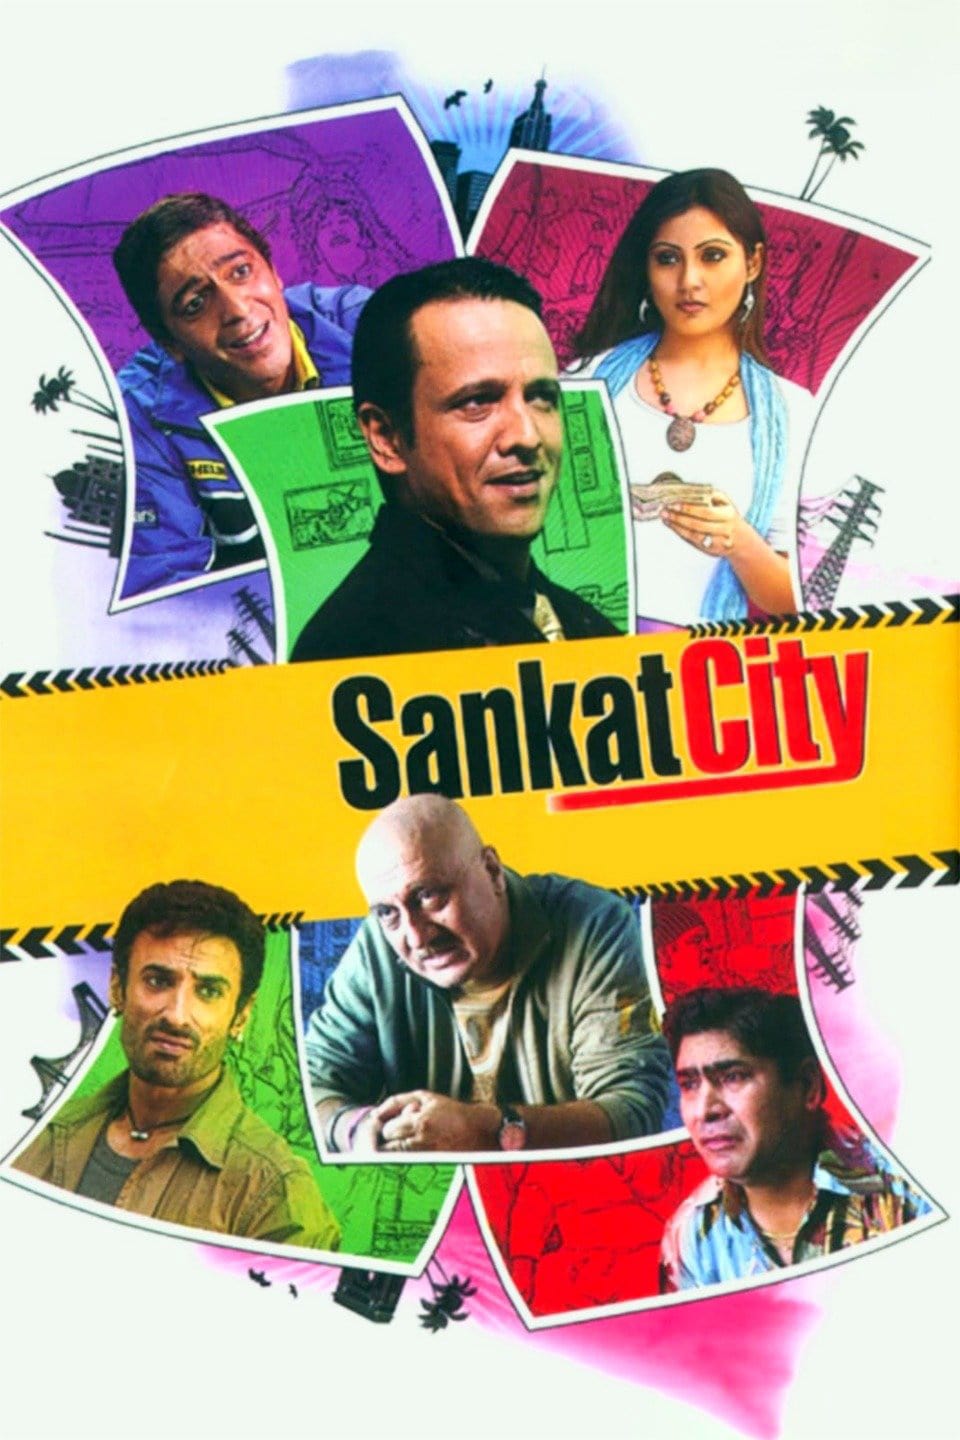 Poster for the movie "Sankat City"